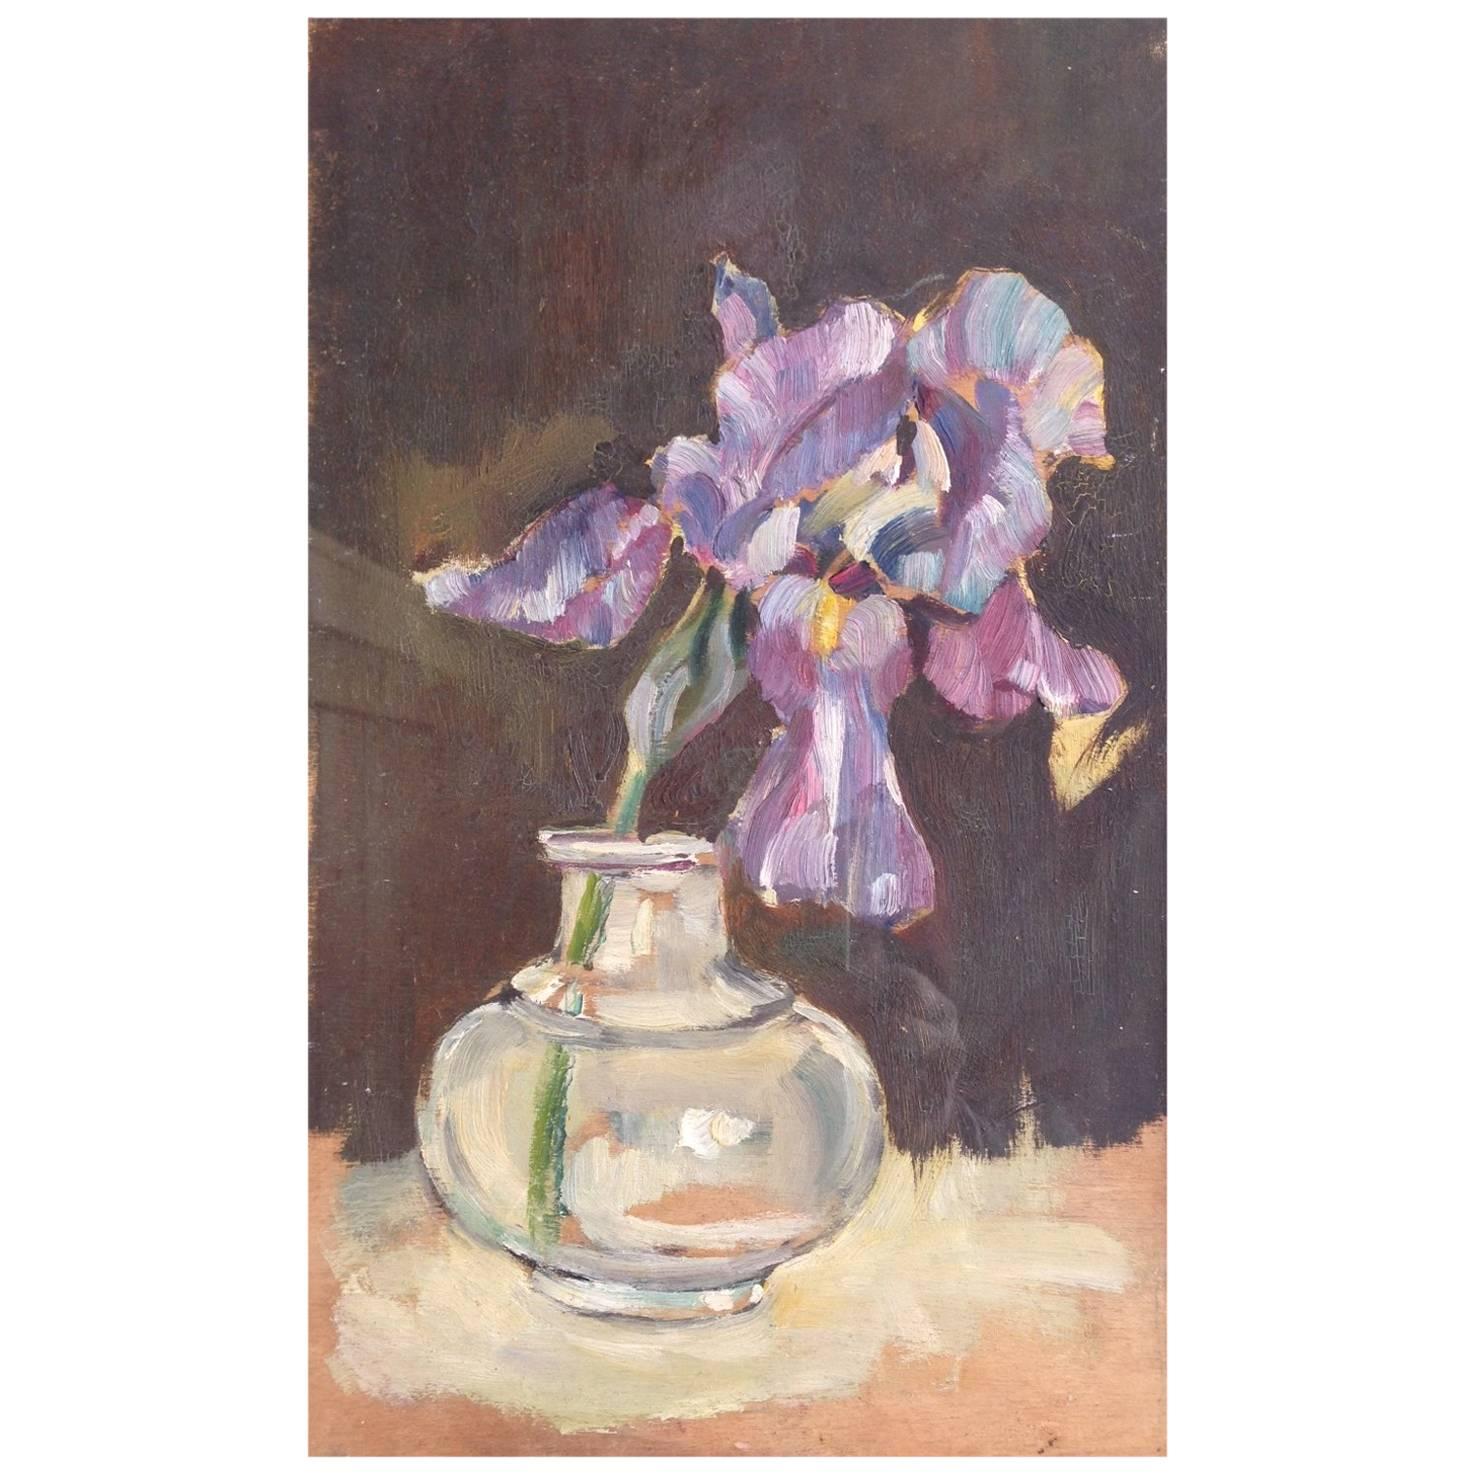 Gérard Albouy "Ouy" Small Painting of Irises For Sale